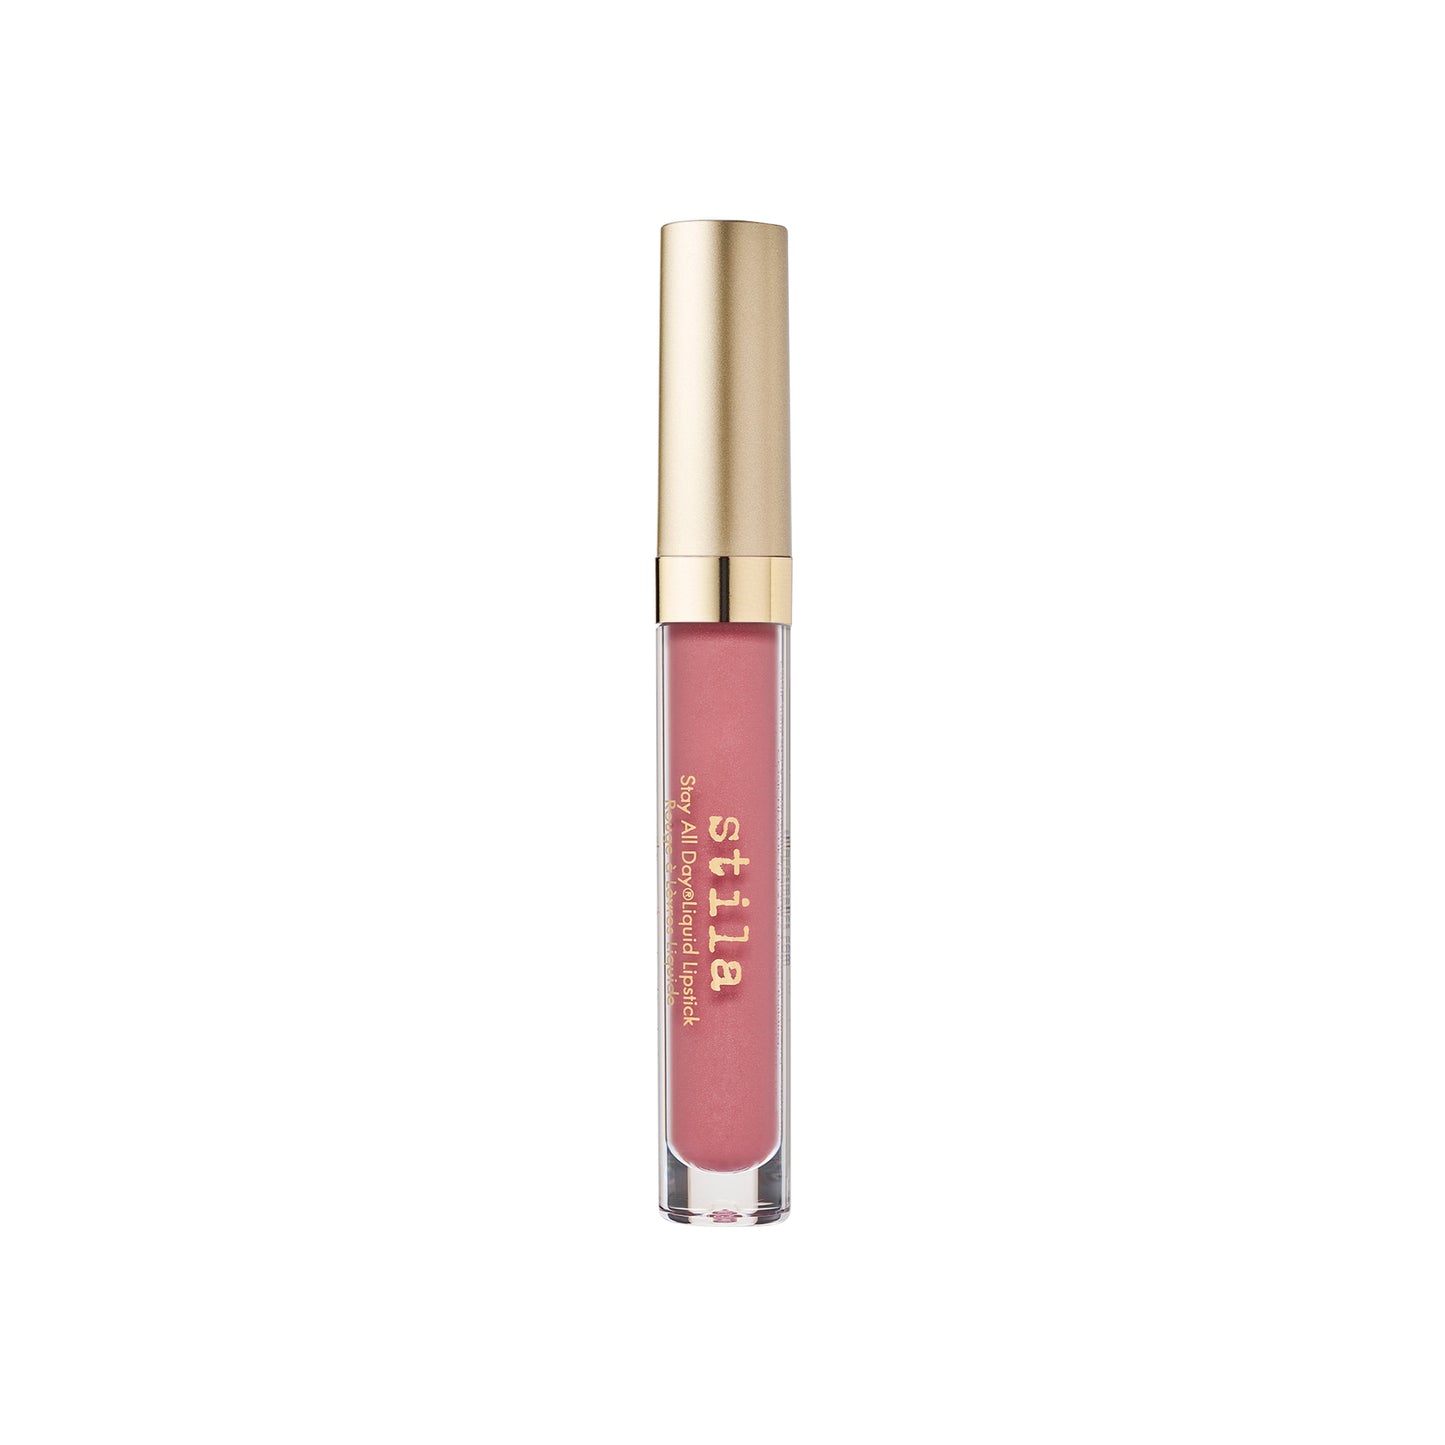 Load image into Gallery viewer, Stila - Stay All Day Liquid Lipstick Shimmer Shade - Pura Shimmer
